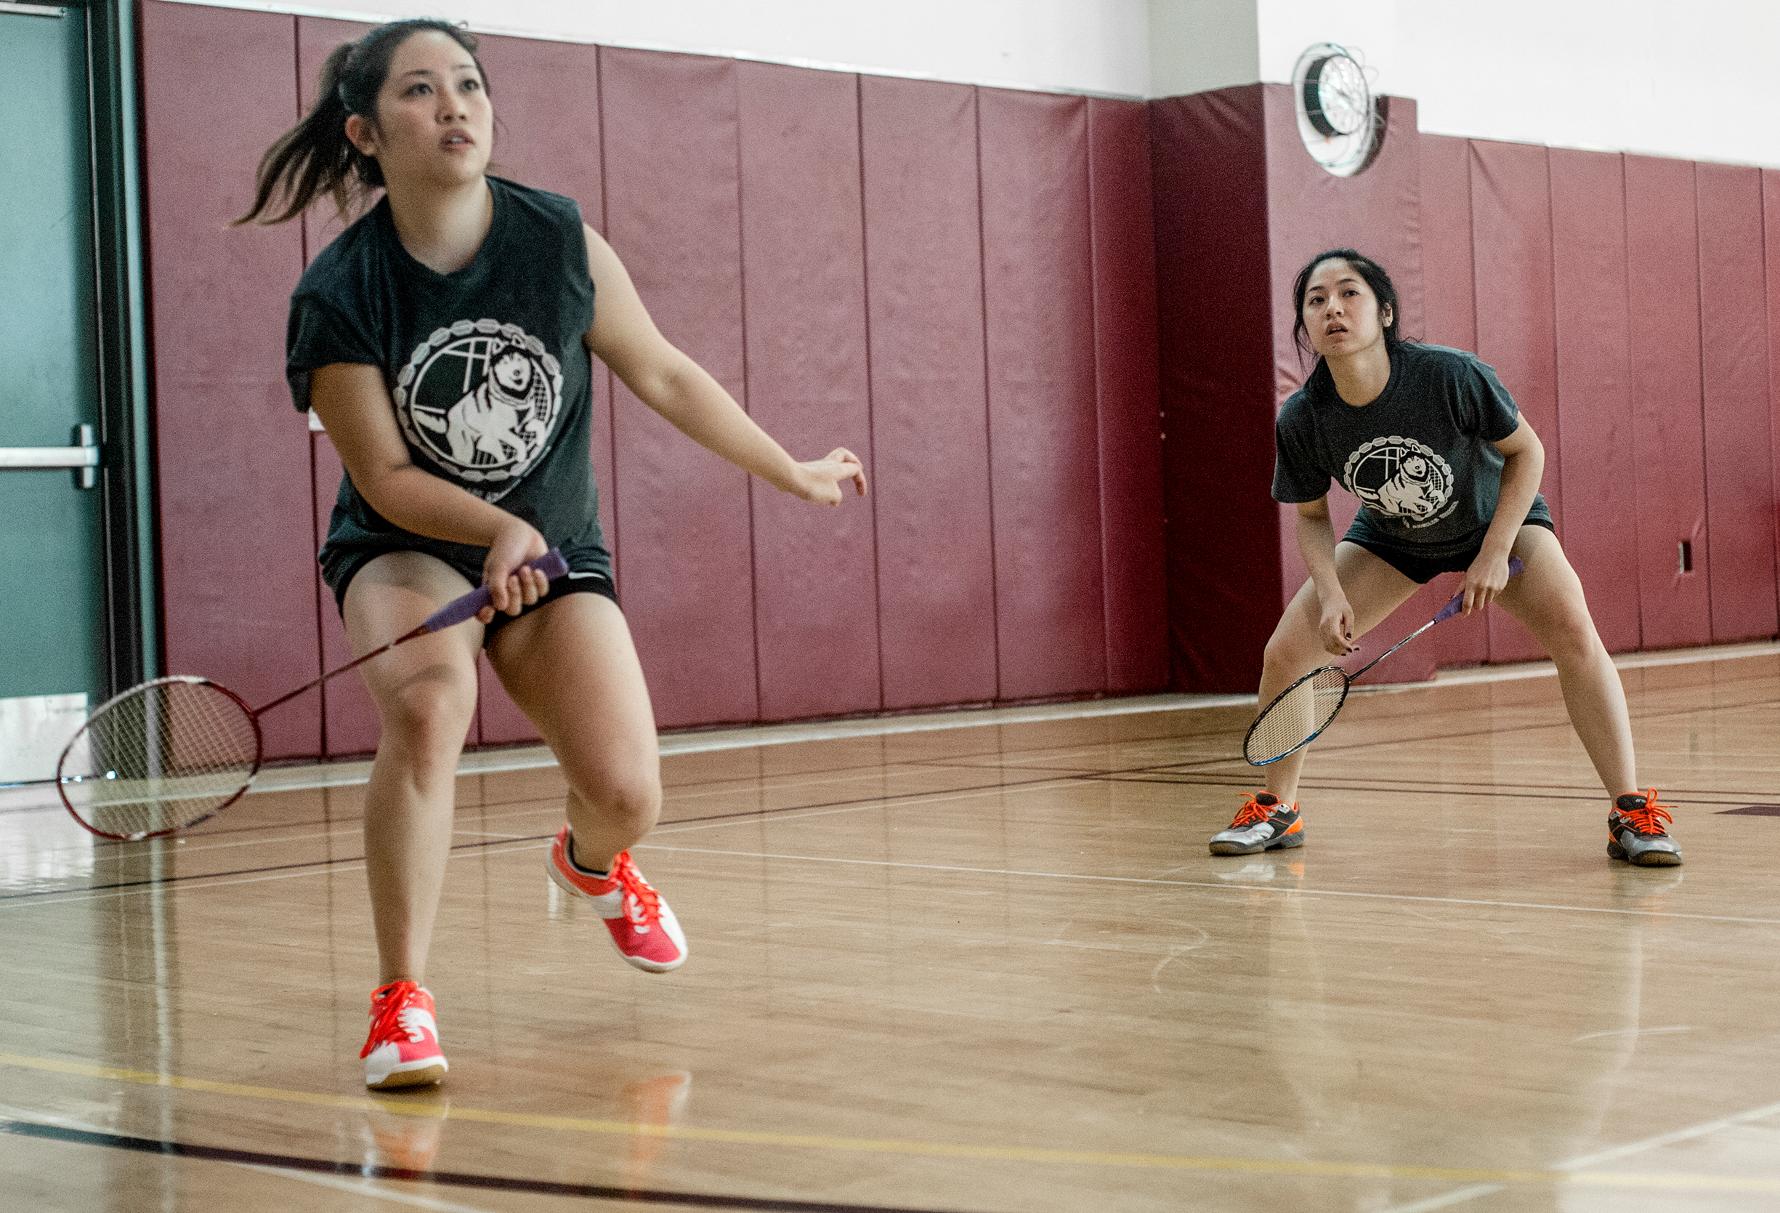 The East Angeles College badminton duo of Jean Mornelle Buenaflor (right) and Serena Lieu wait for a return shot against the CCCAA defending state champion doubles team from Pasadena City College won by ELAC 21-15, 21-15 in a 15-6 team loss to the Lancers.